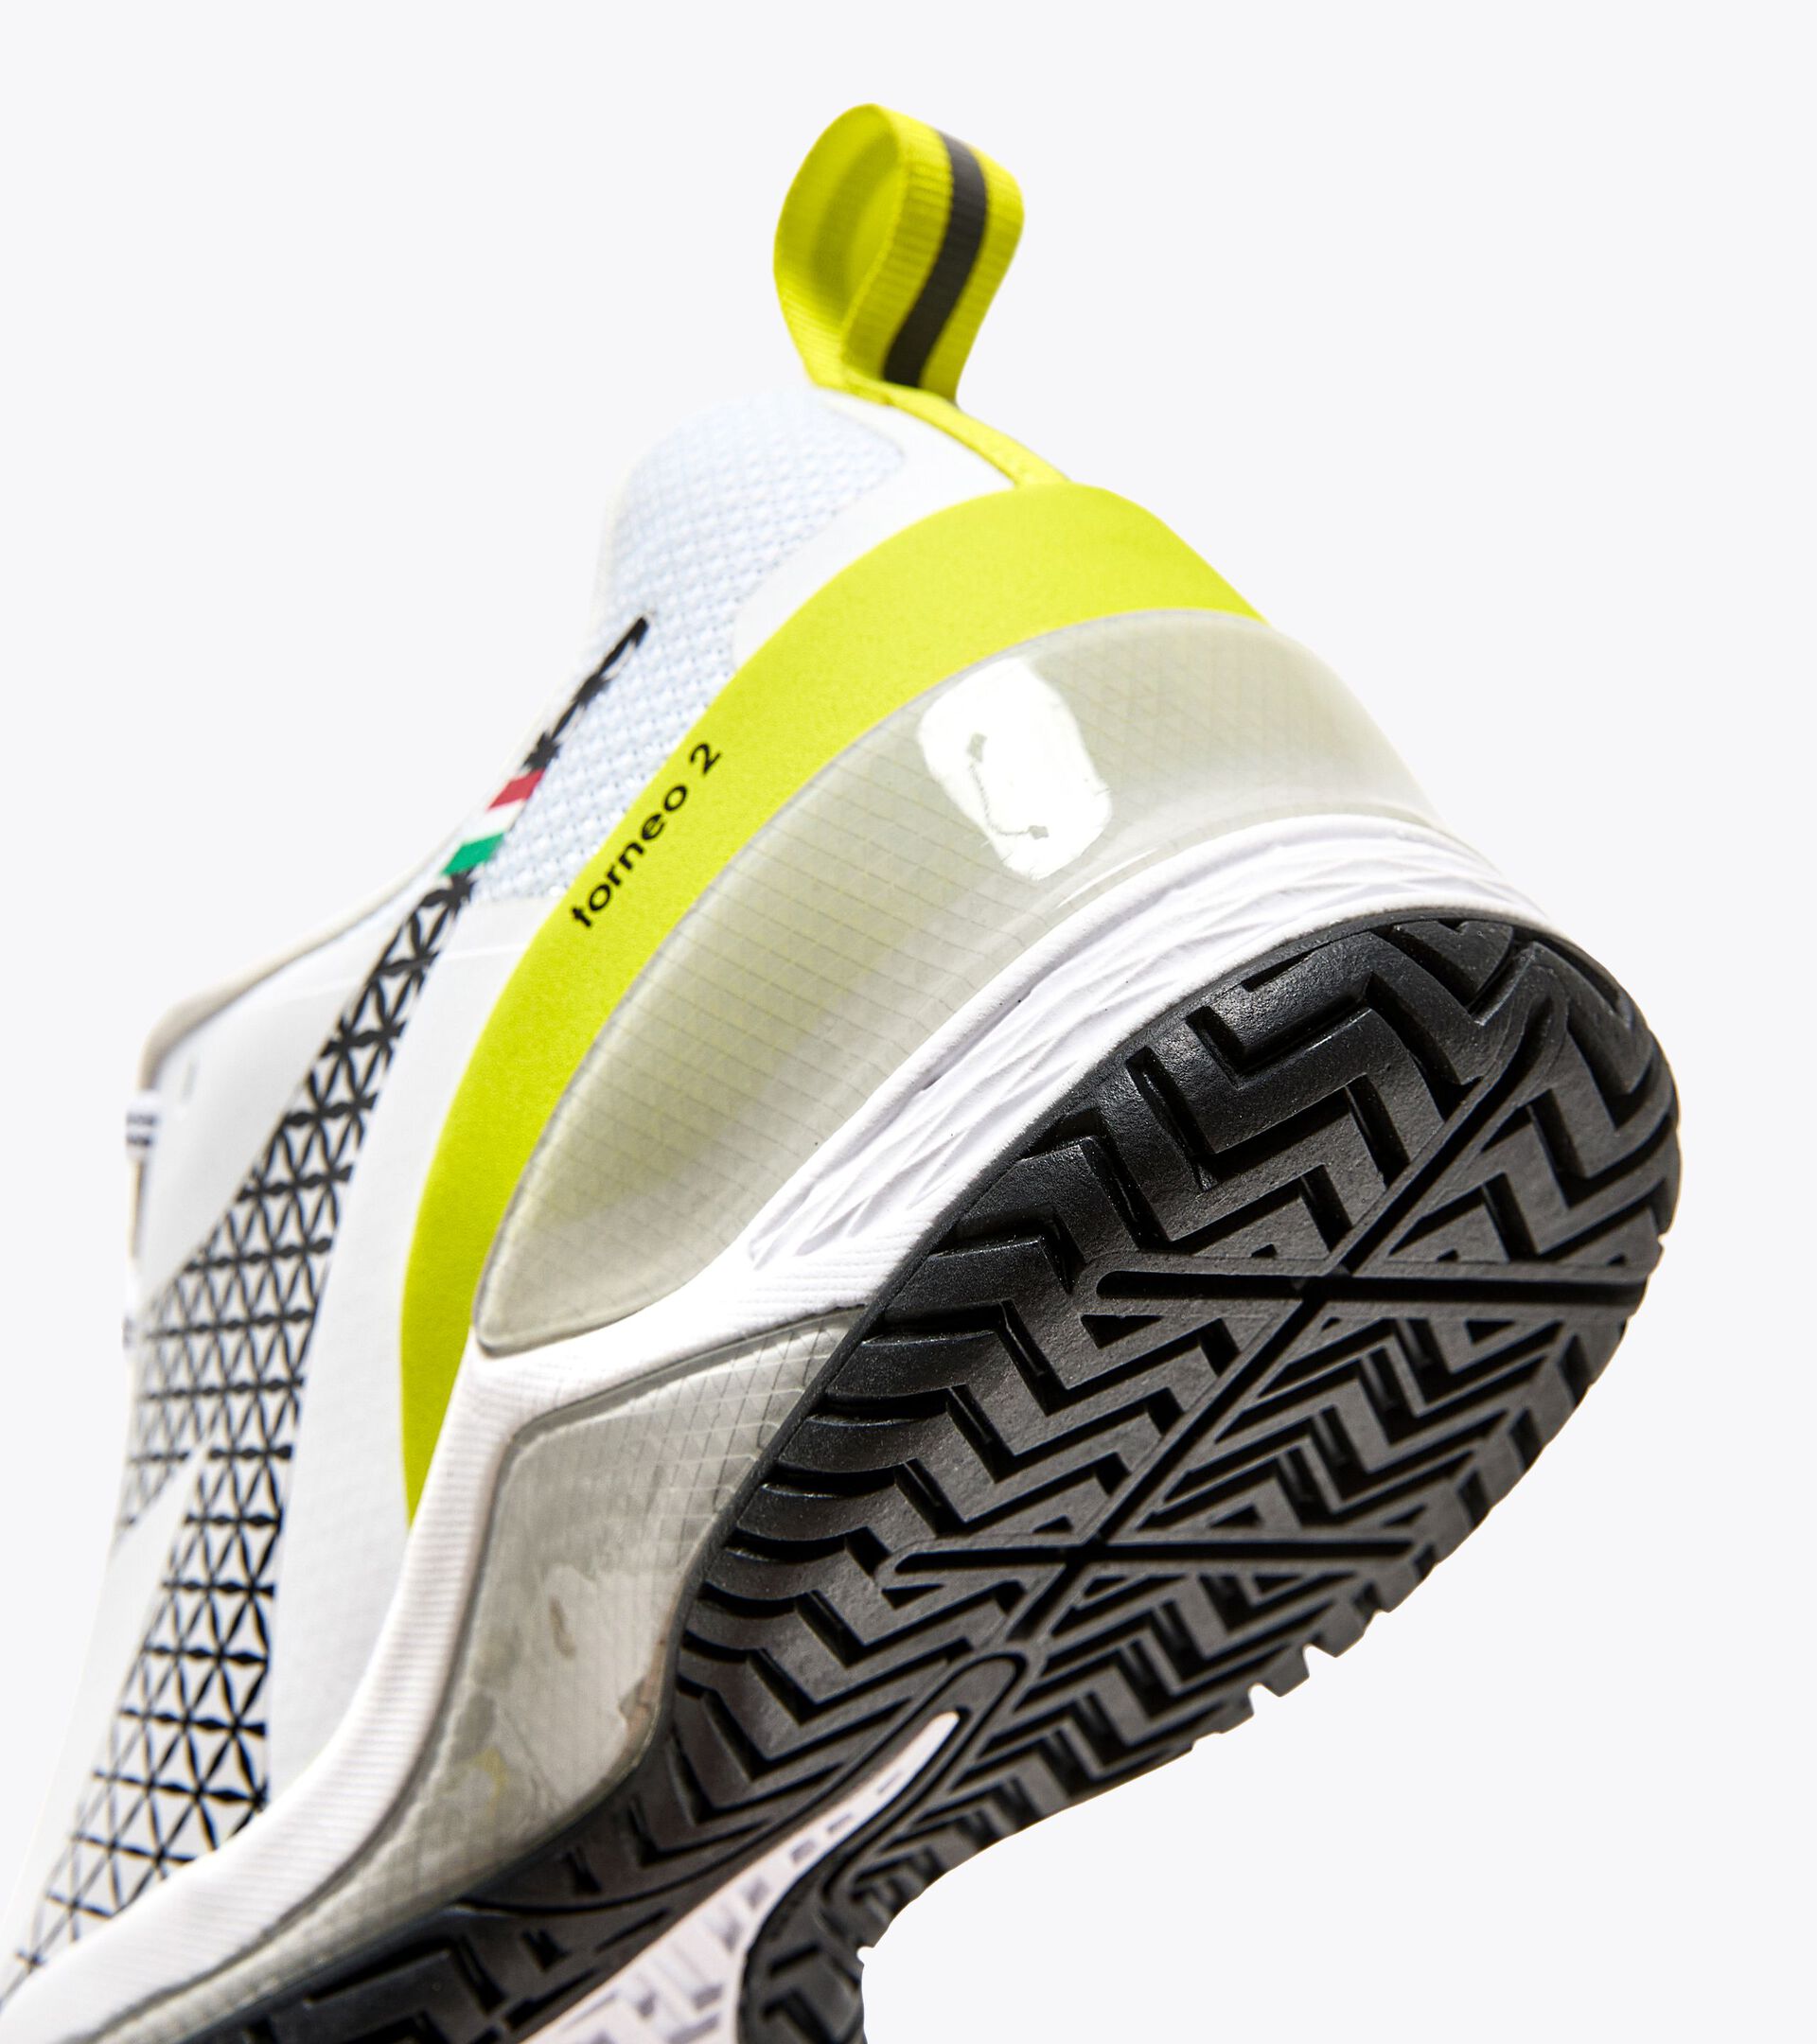 Tennis shoes for hard surfaces or clay courts - Women BLUSHIELD TORNEO 2 W AG WHITE/BLACK/EVENING PRIMROSE - Diadora